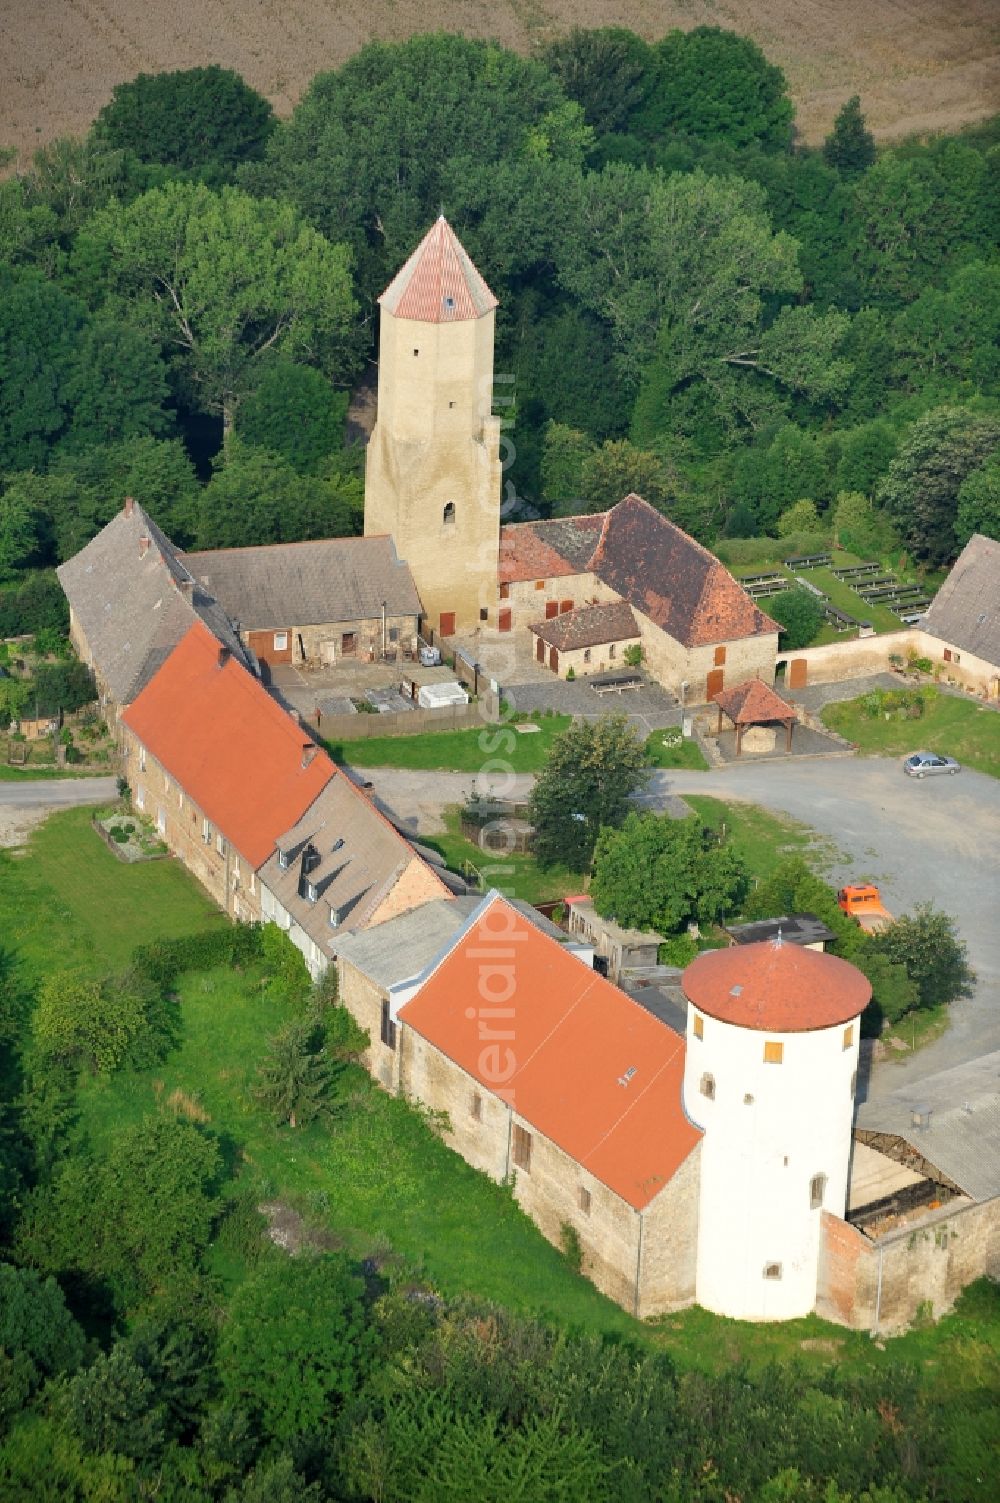 Freckleben from the bird's eye view: View of the castle Freckleben in the homonymous city in Saxony-Anhalt. It is a Romanesque castle, which has emerged 900-1000 and is located in promontory. The well-preserved wall construction and the castle keep with a rotary spindle ladder can be visited